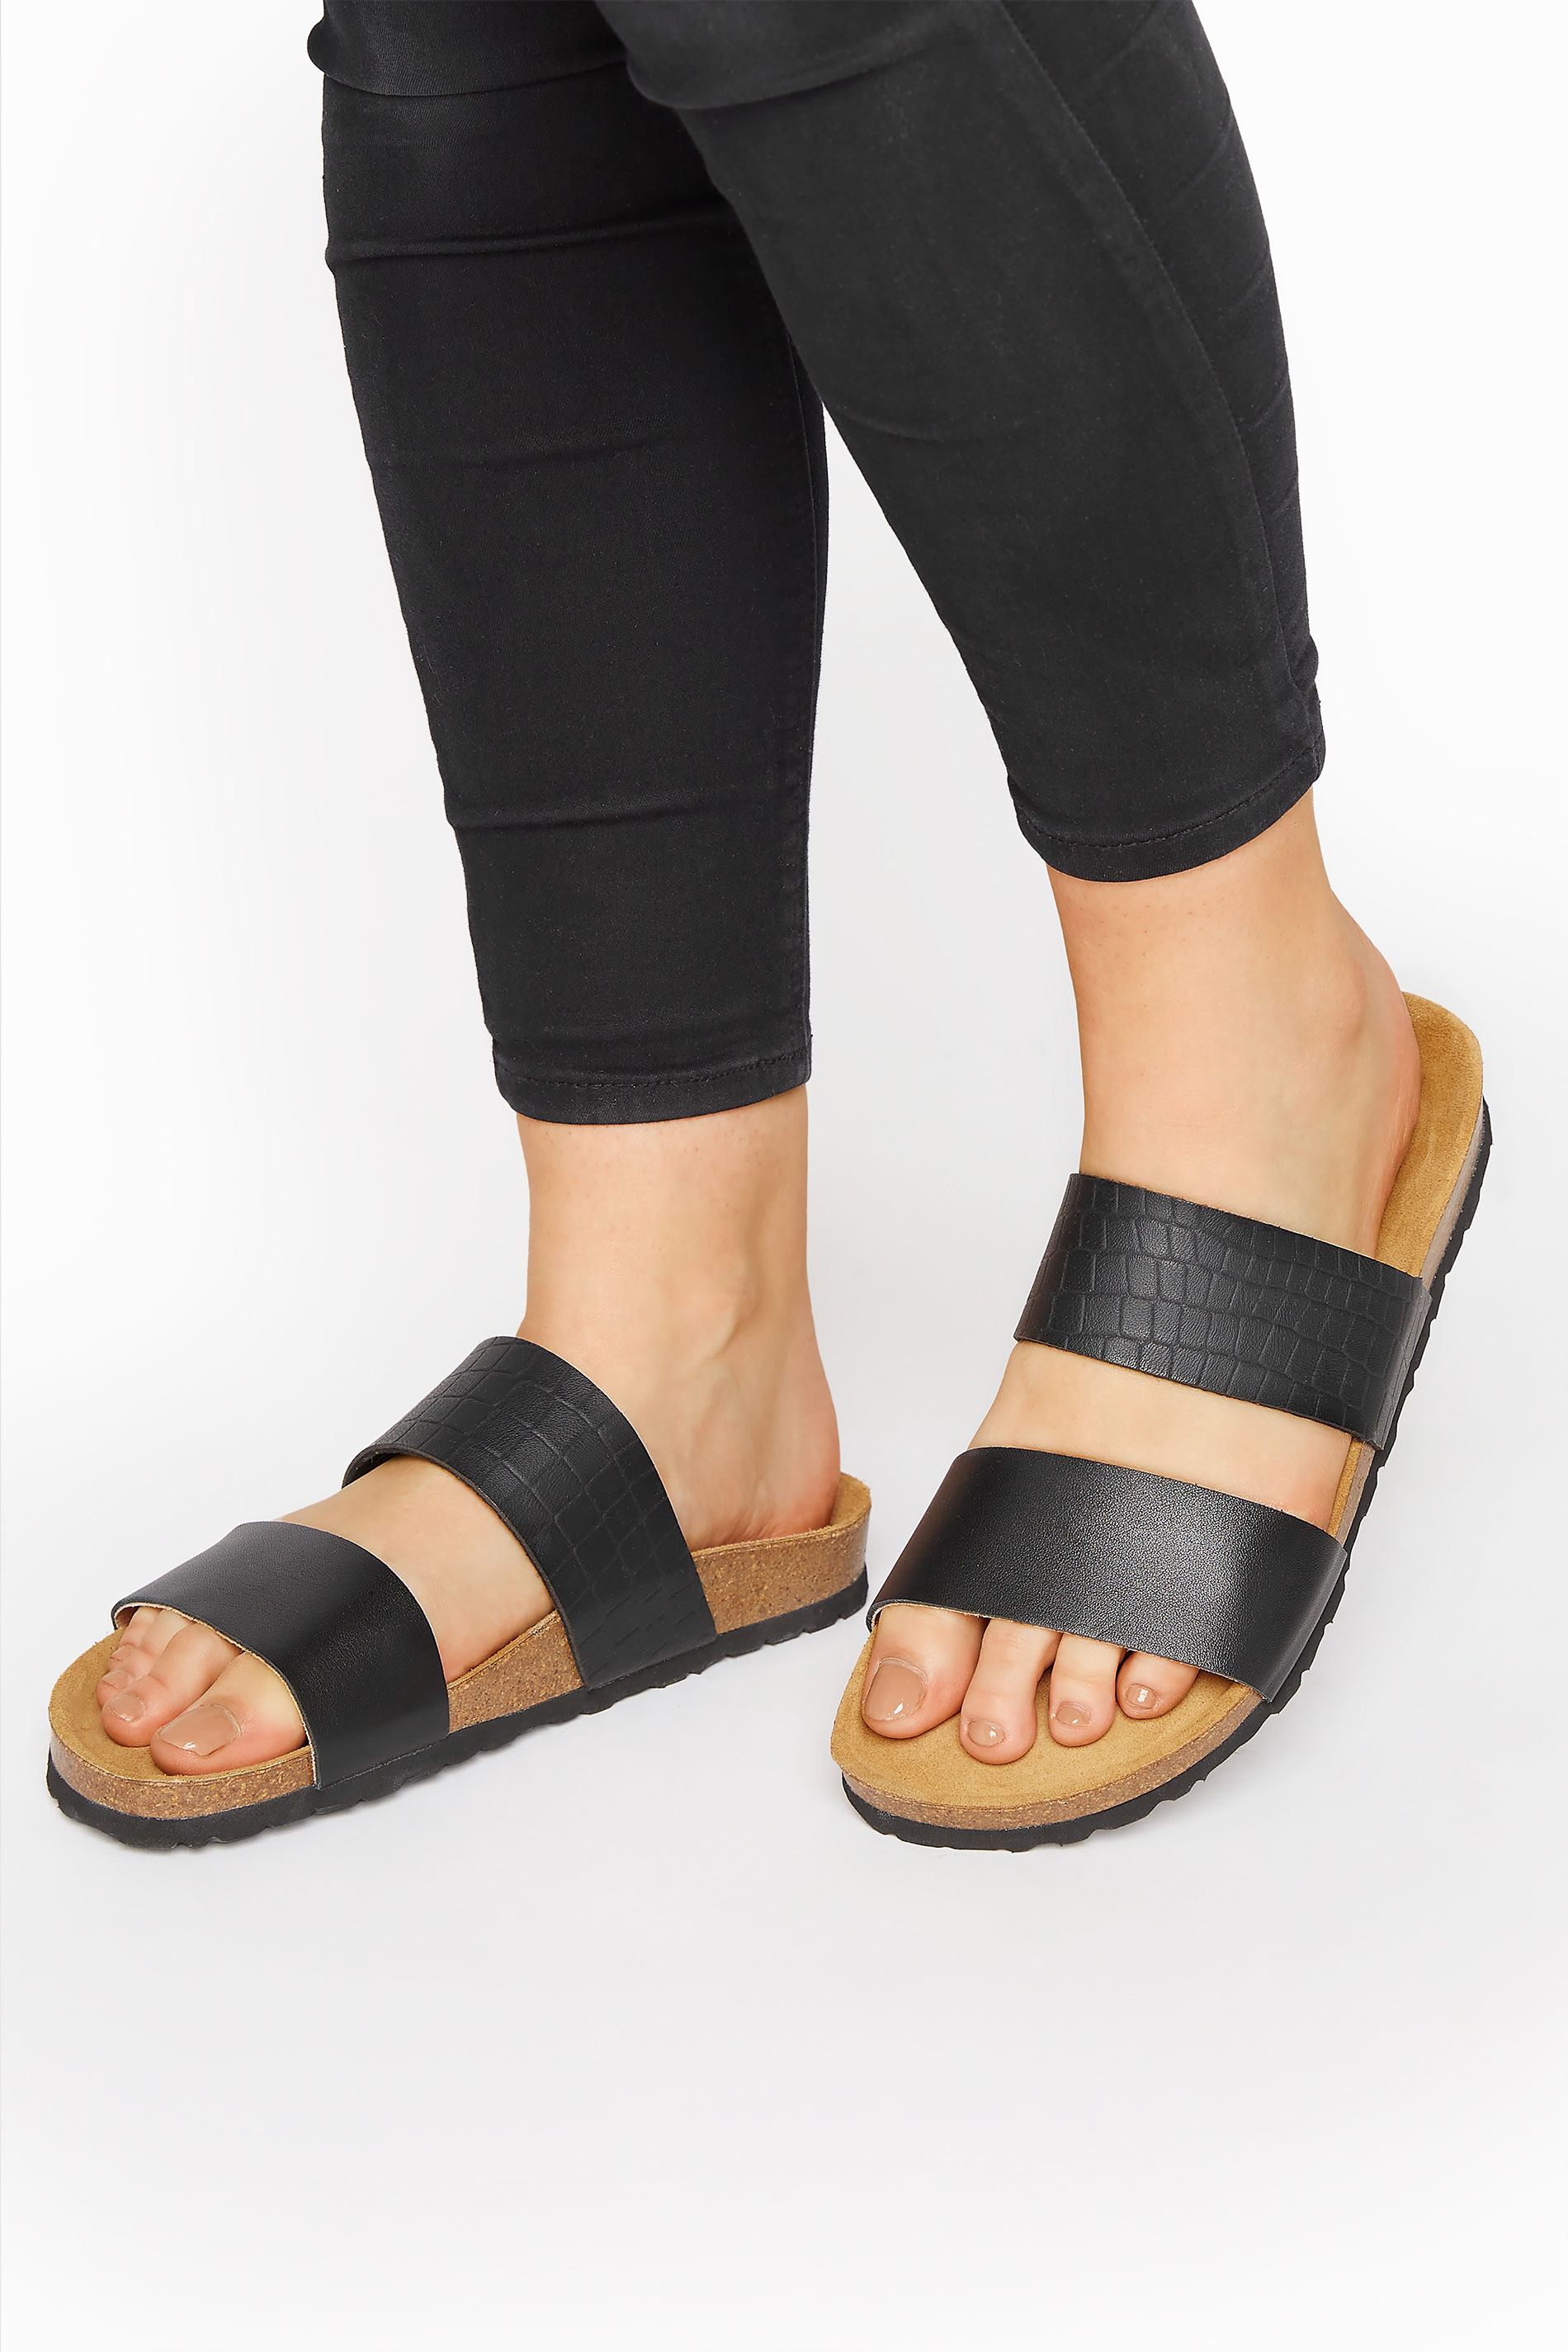 LTS Black Leather Two Strap Footbed Sandals In Standard D Fit | Long Tall Sally  1